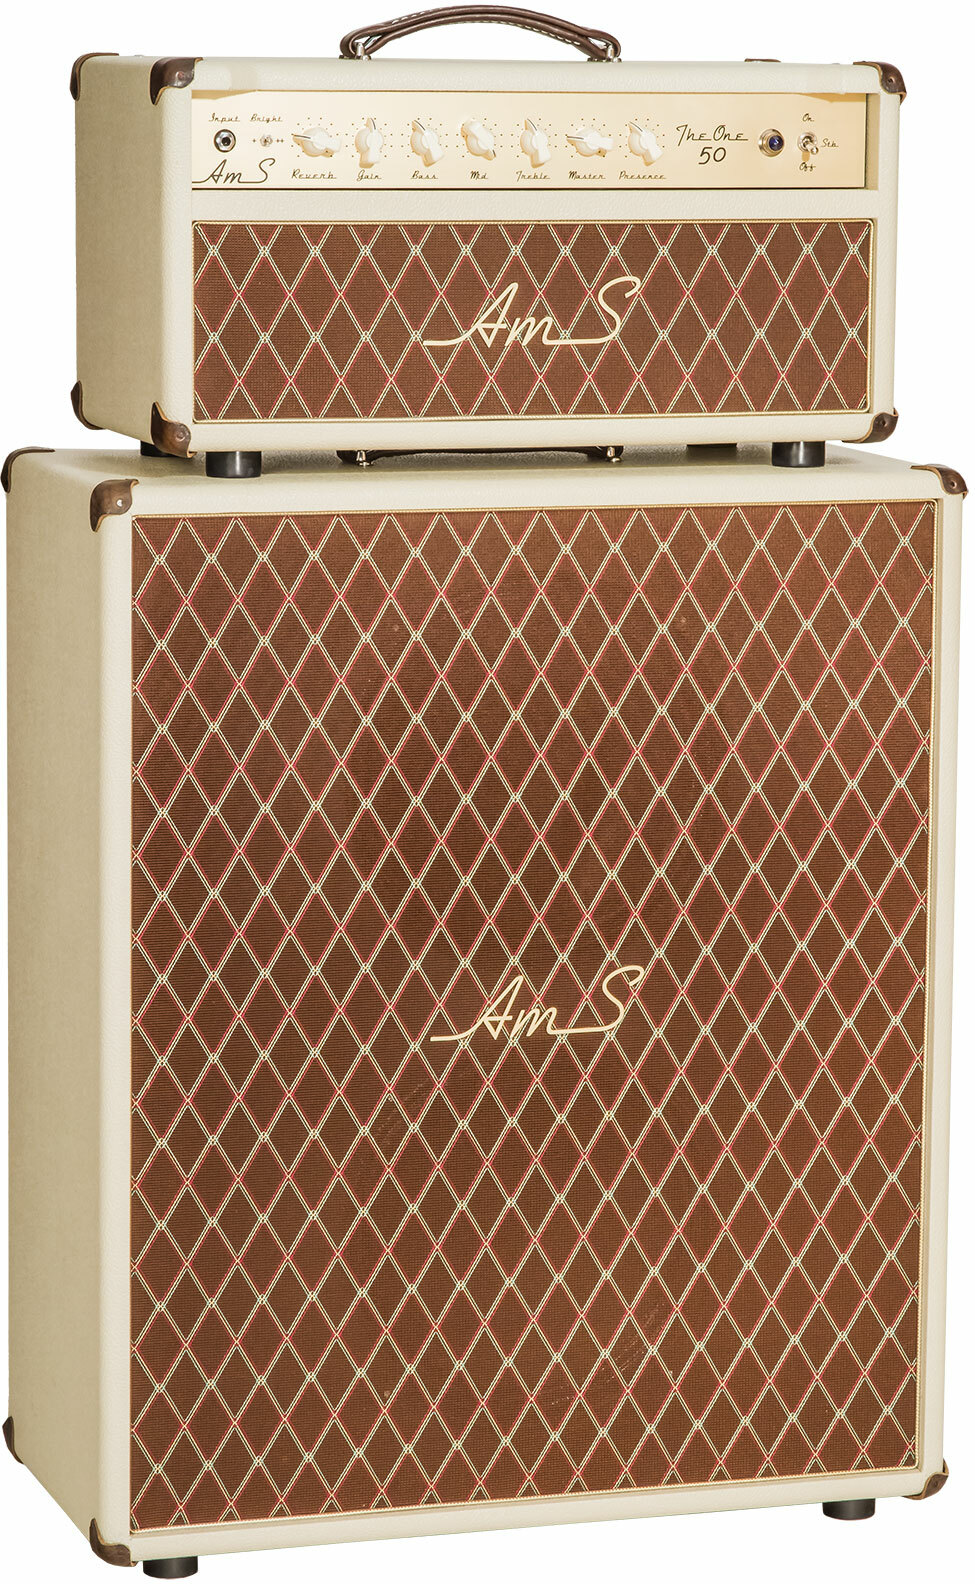 Ams Amplifiers The One 50 Analog Reverb Head 50w 6l6 + Cab 2x12 V30-ob White - Electric guitar amp stack - Main picture